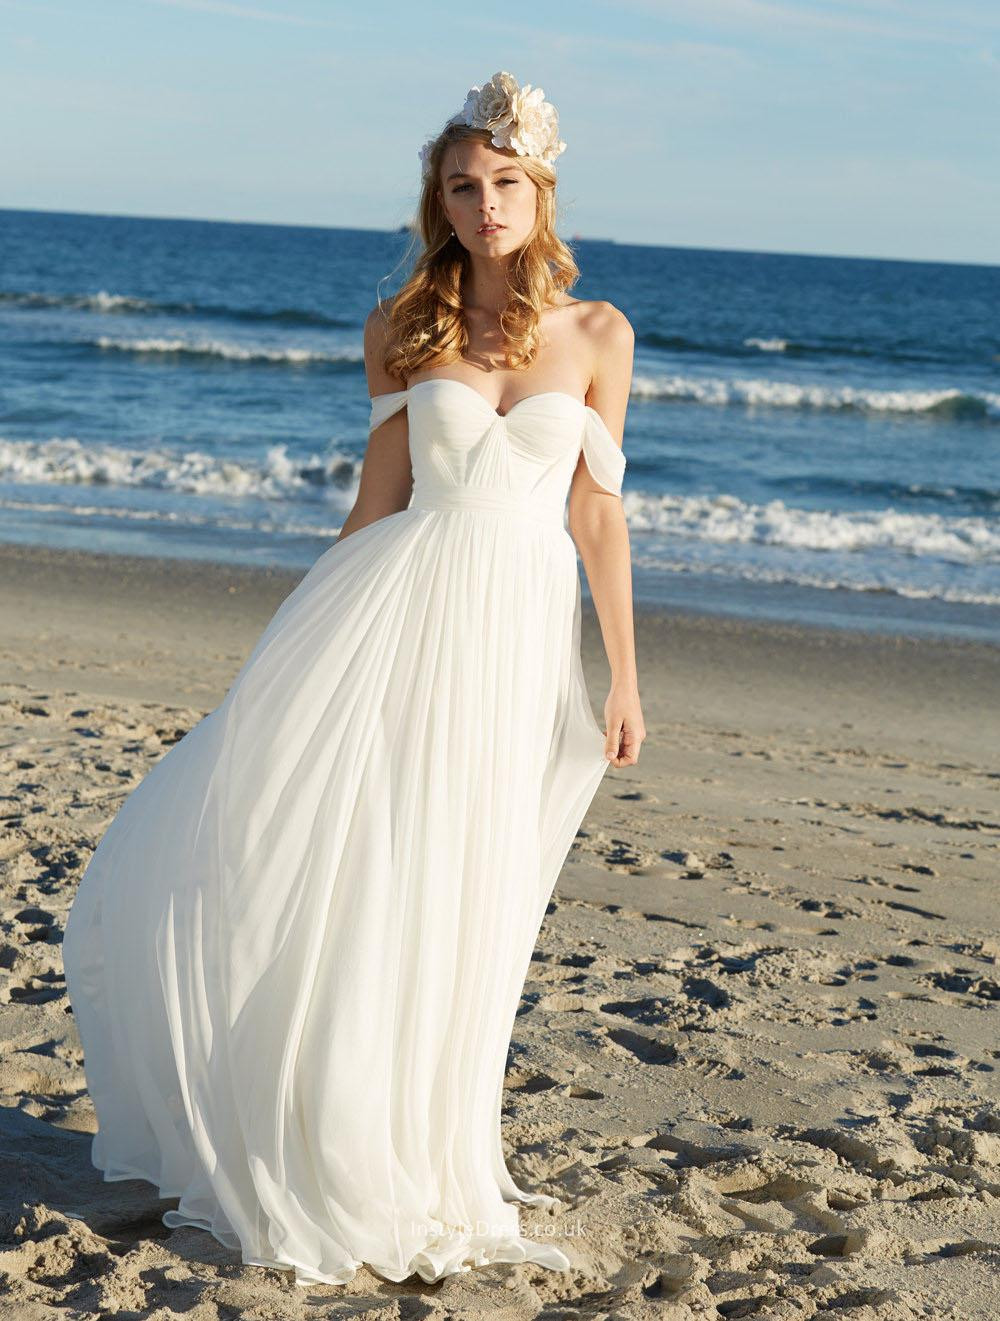 Beach Wedding Gowns
 I Want It All Fashion Beauty and Lifestyle Blog